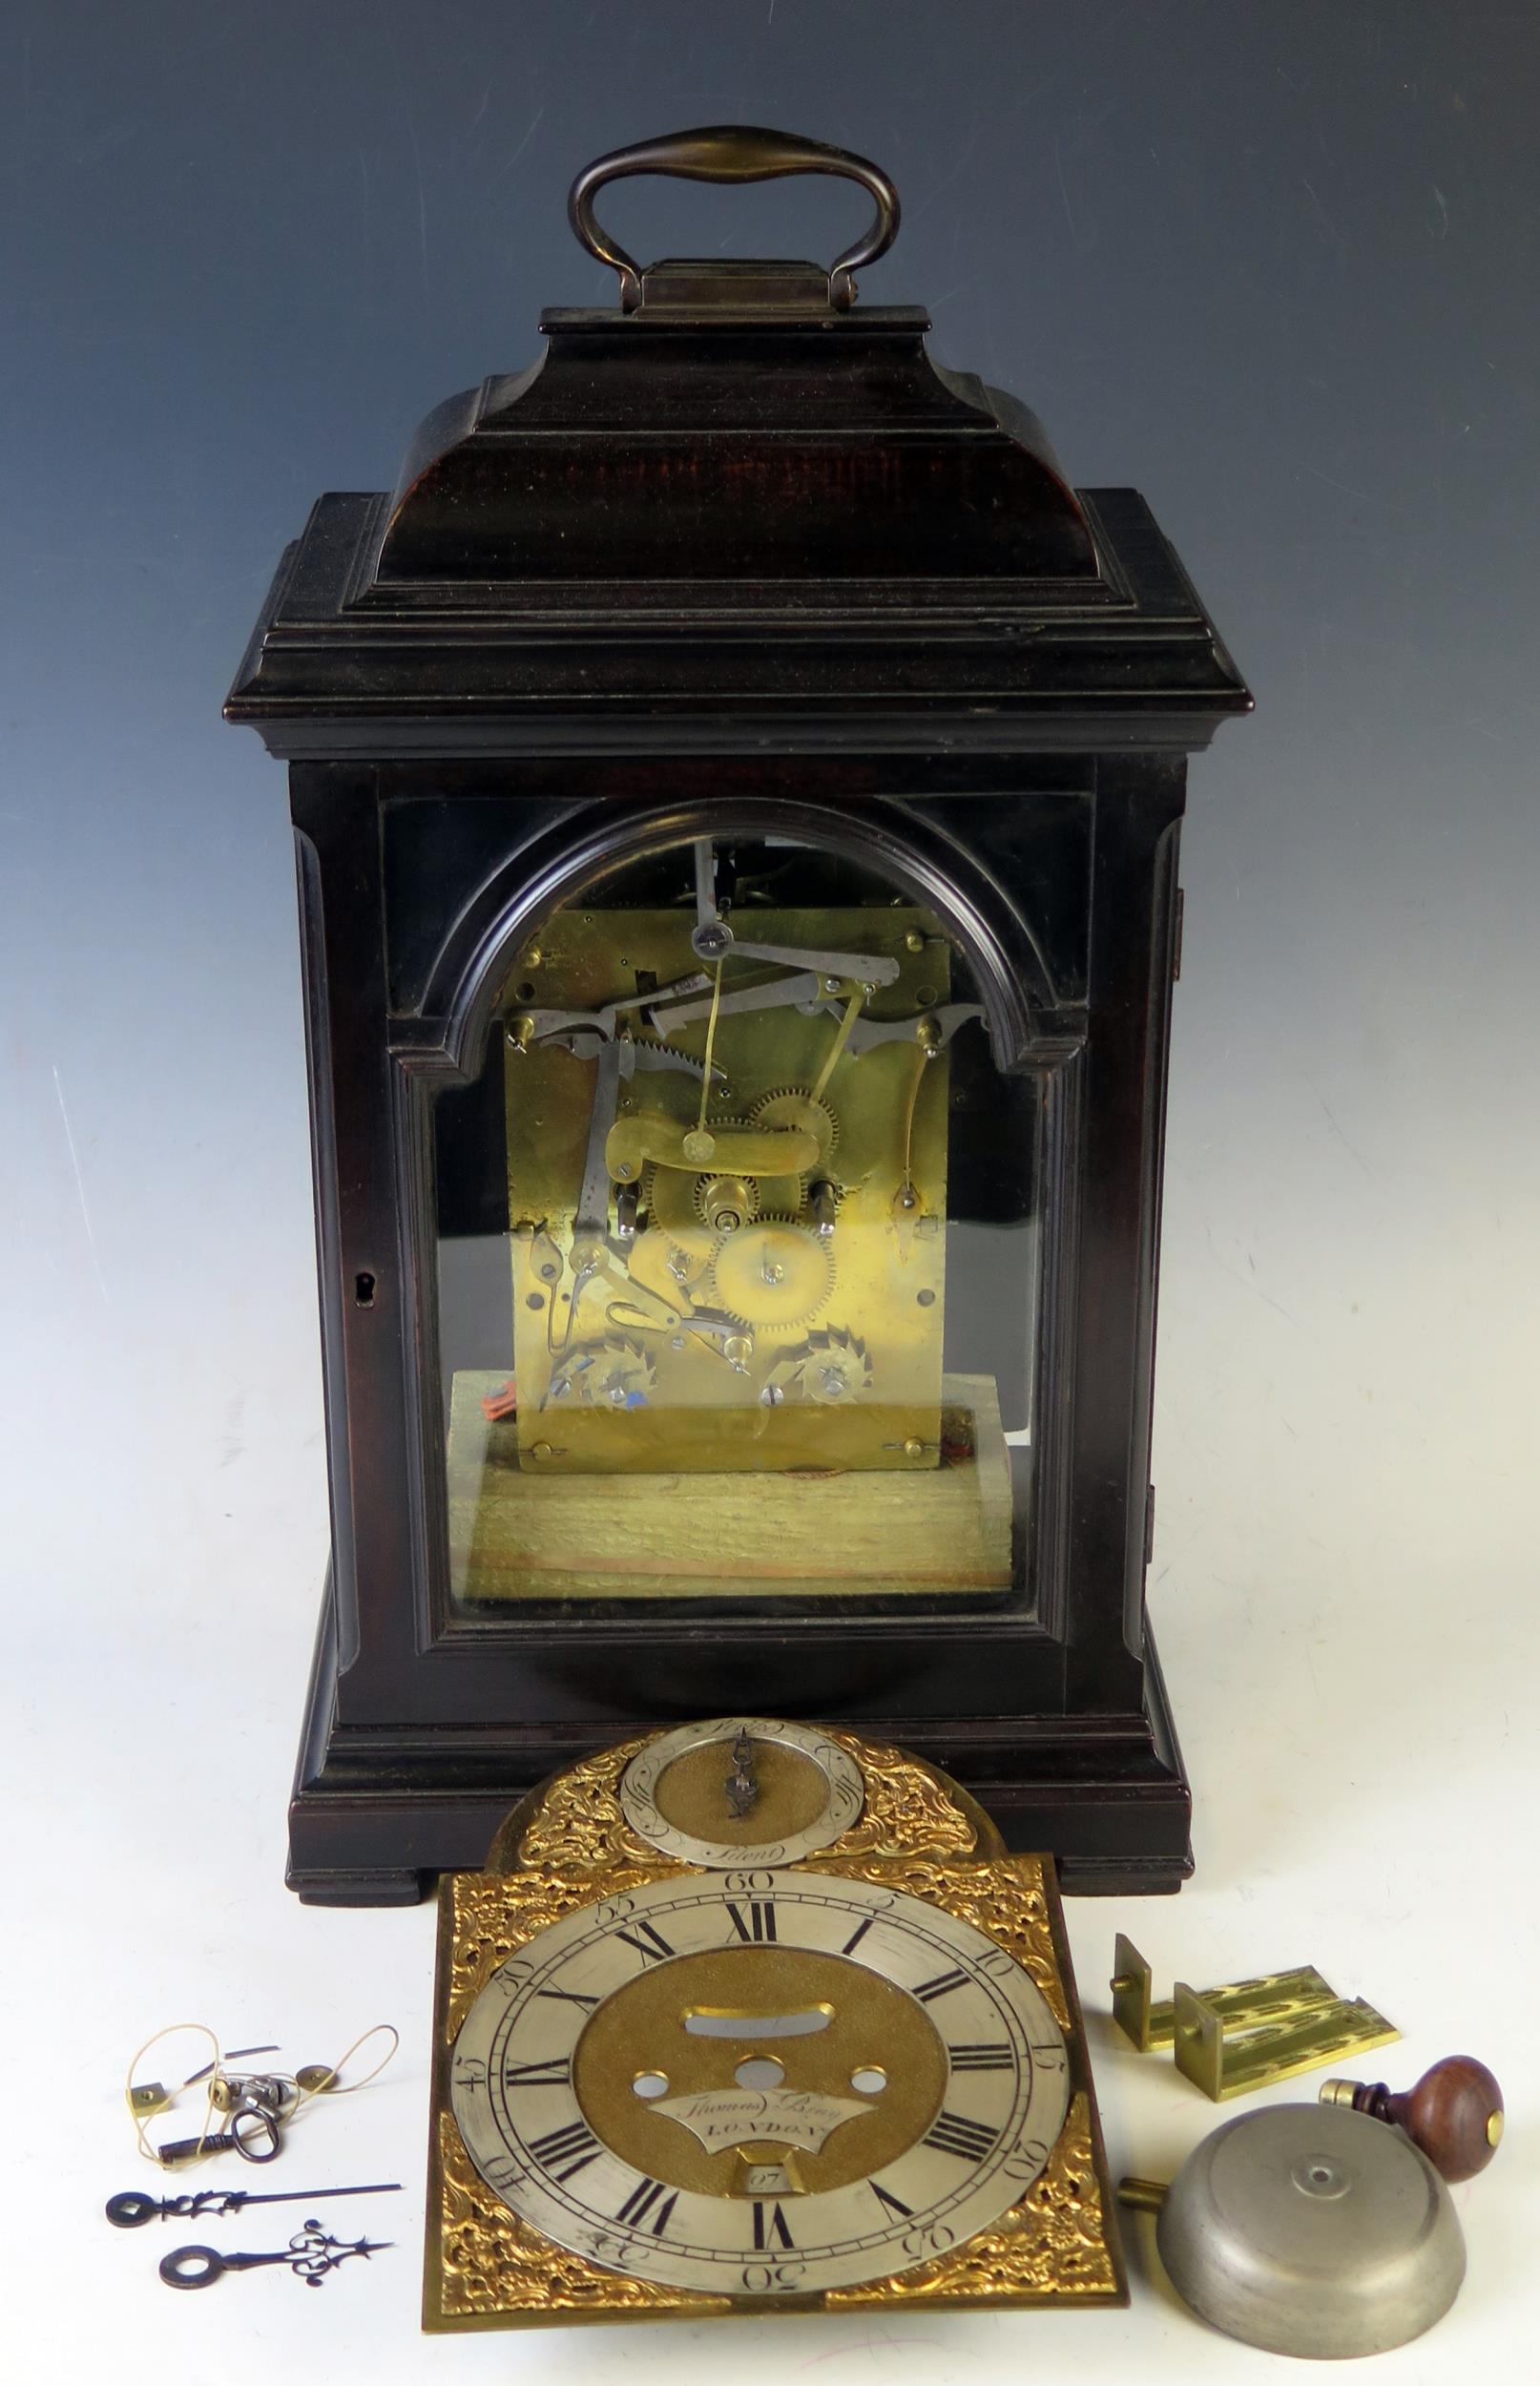 Thomas Bray, London, a mid 18th century ebonised bracket clock, the case with inverted bell top - Image 10 of 10